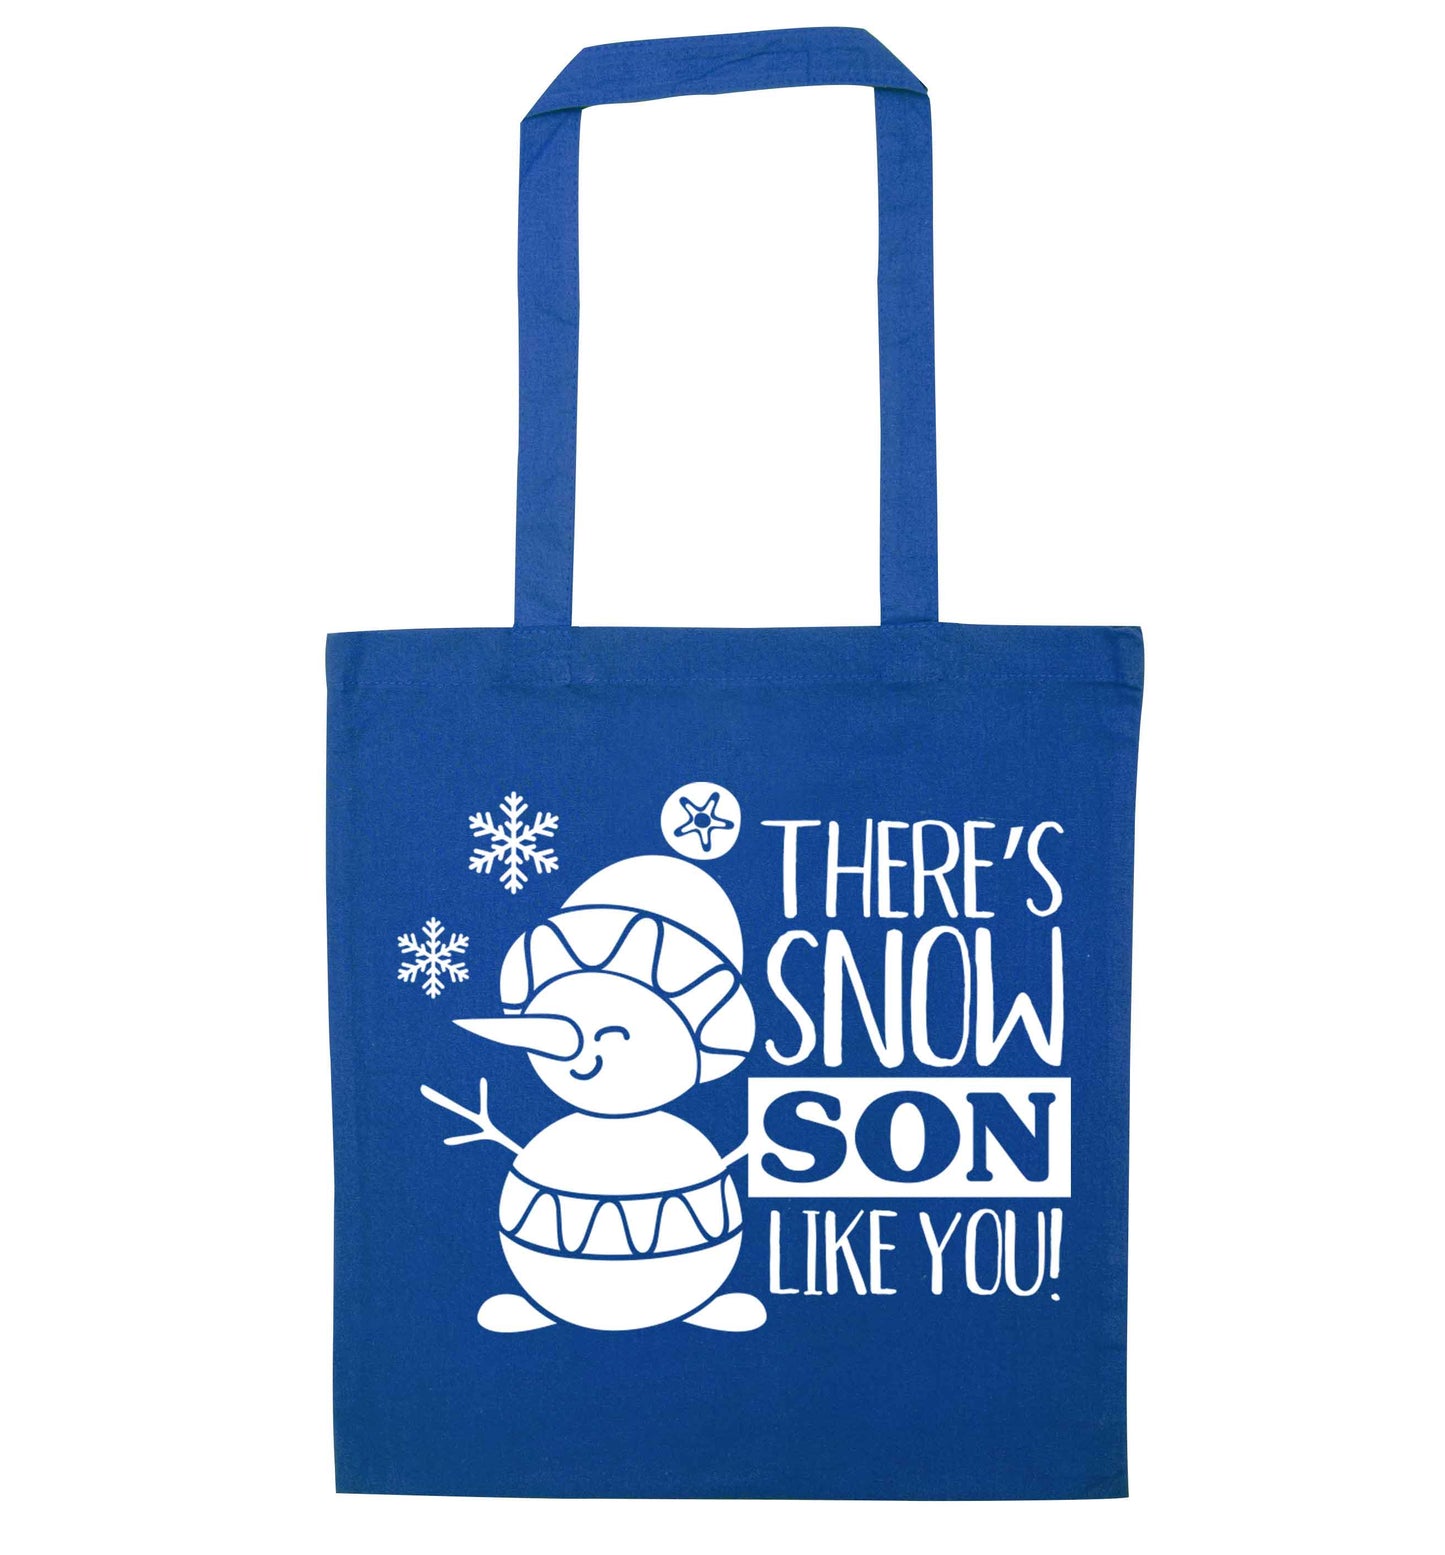 There's snow son like you blue tote bag